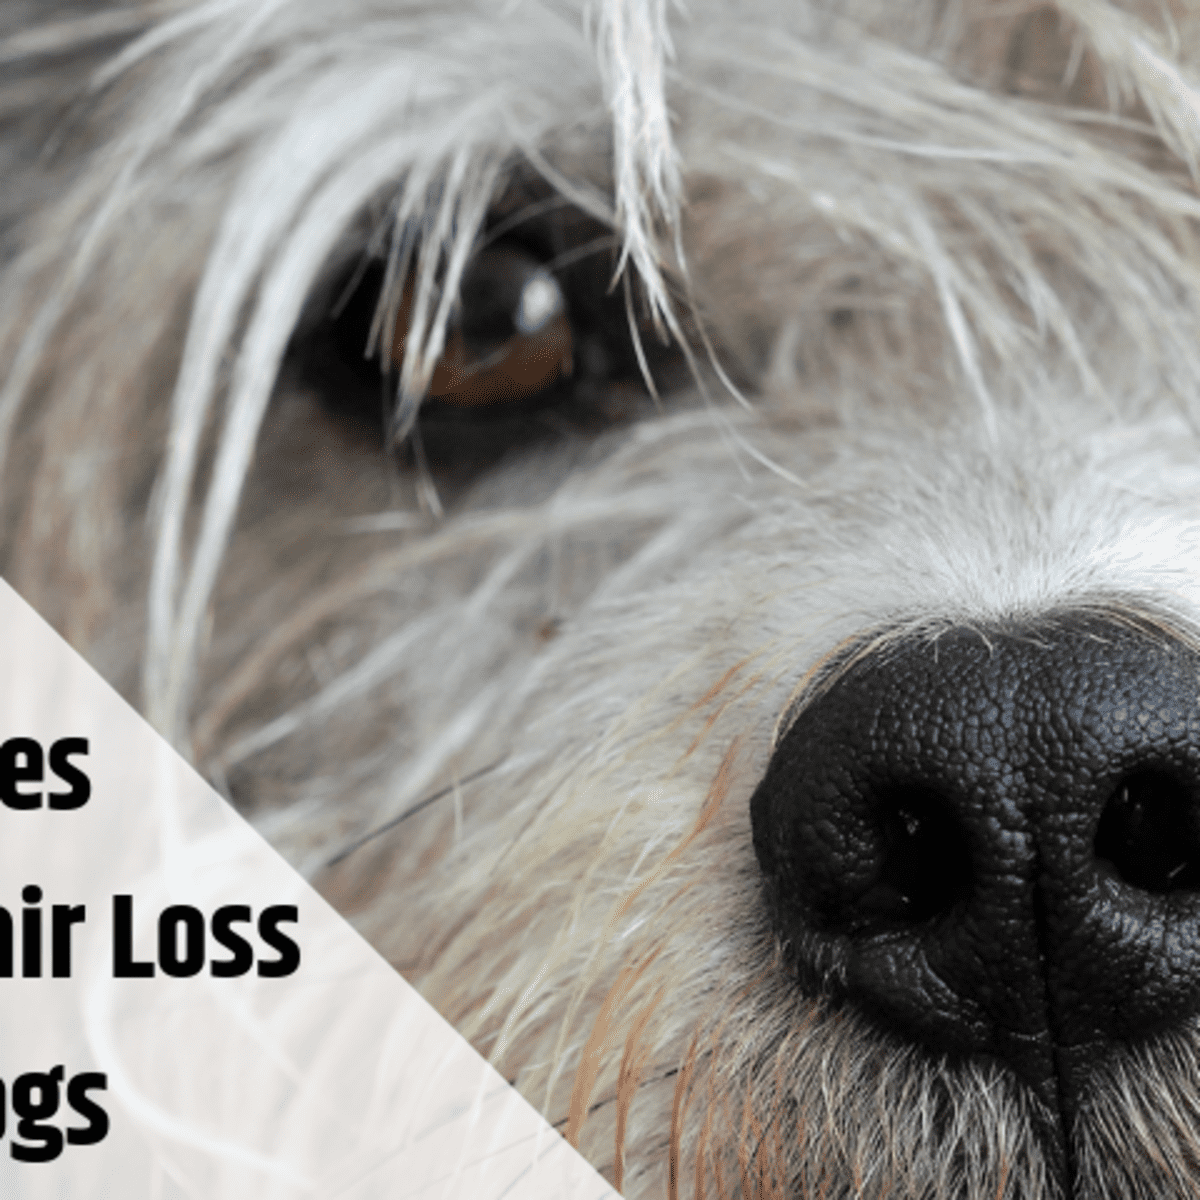 Why Is My Dog Losing Hair and What Should I Do About It? - PetHelpful